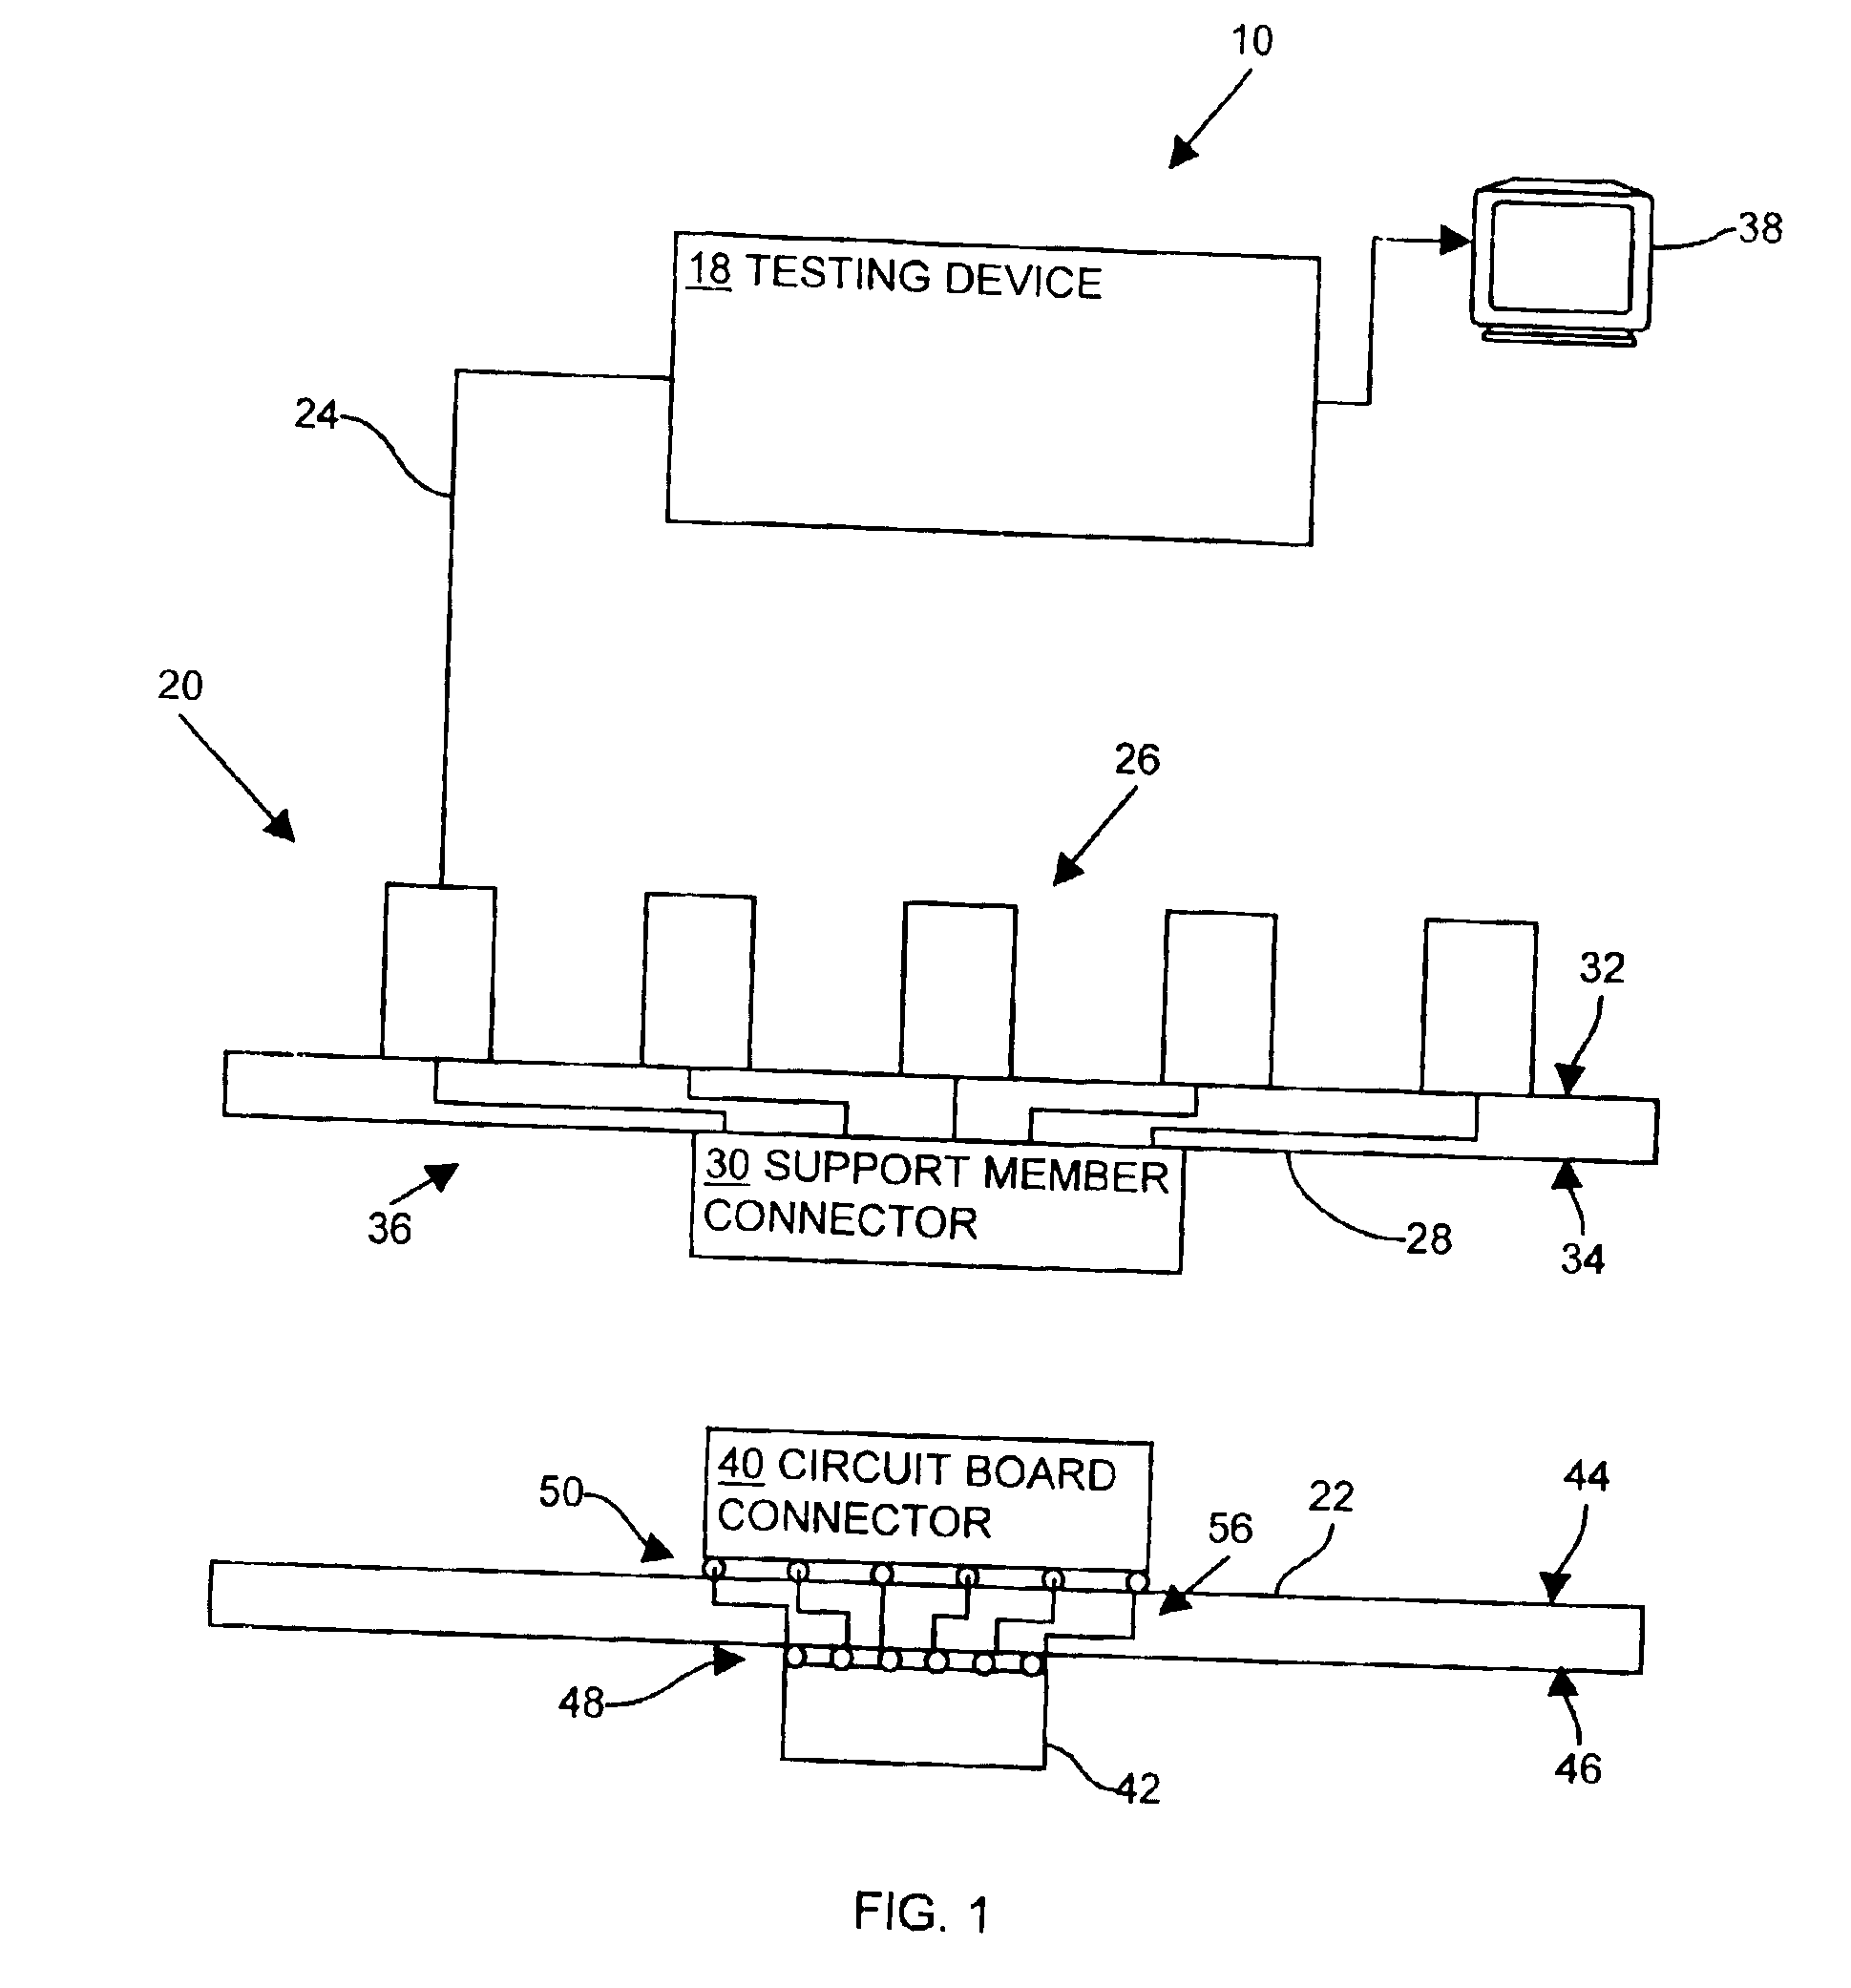 Methods and apparatus for testing a circuit board using a surface mountable adaptor